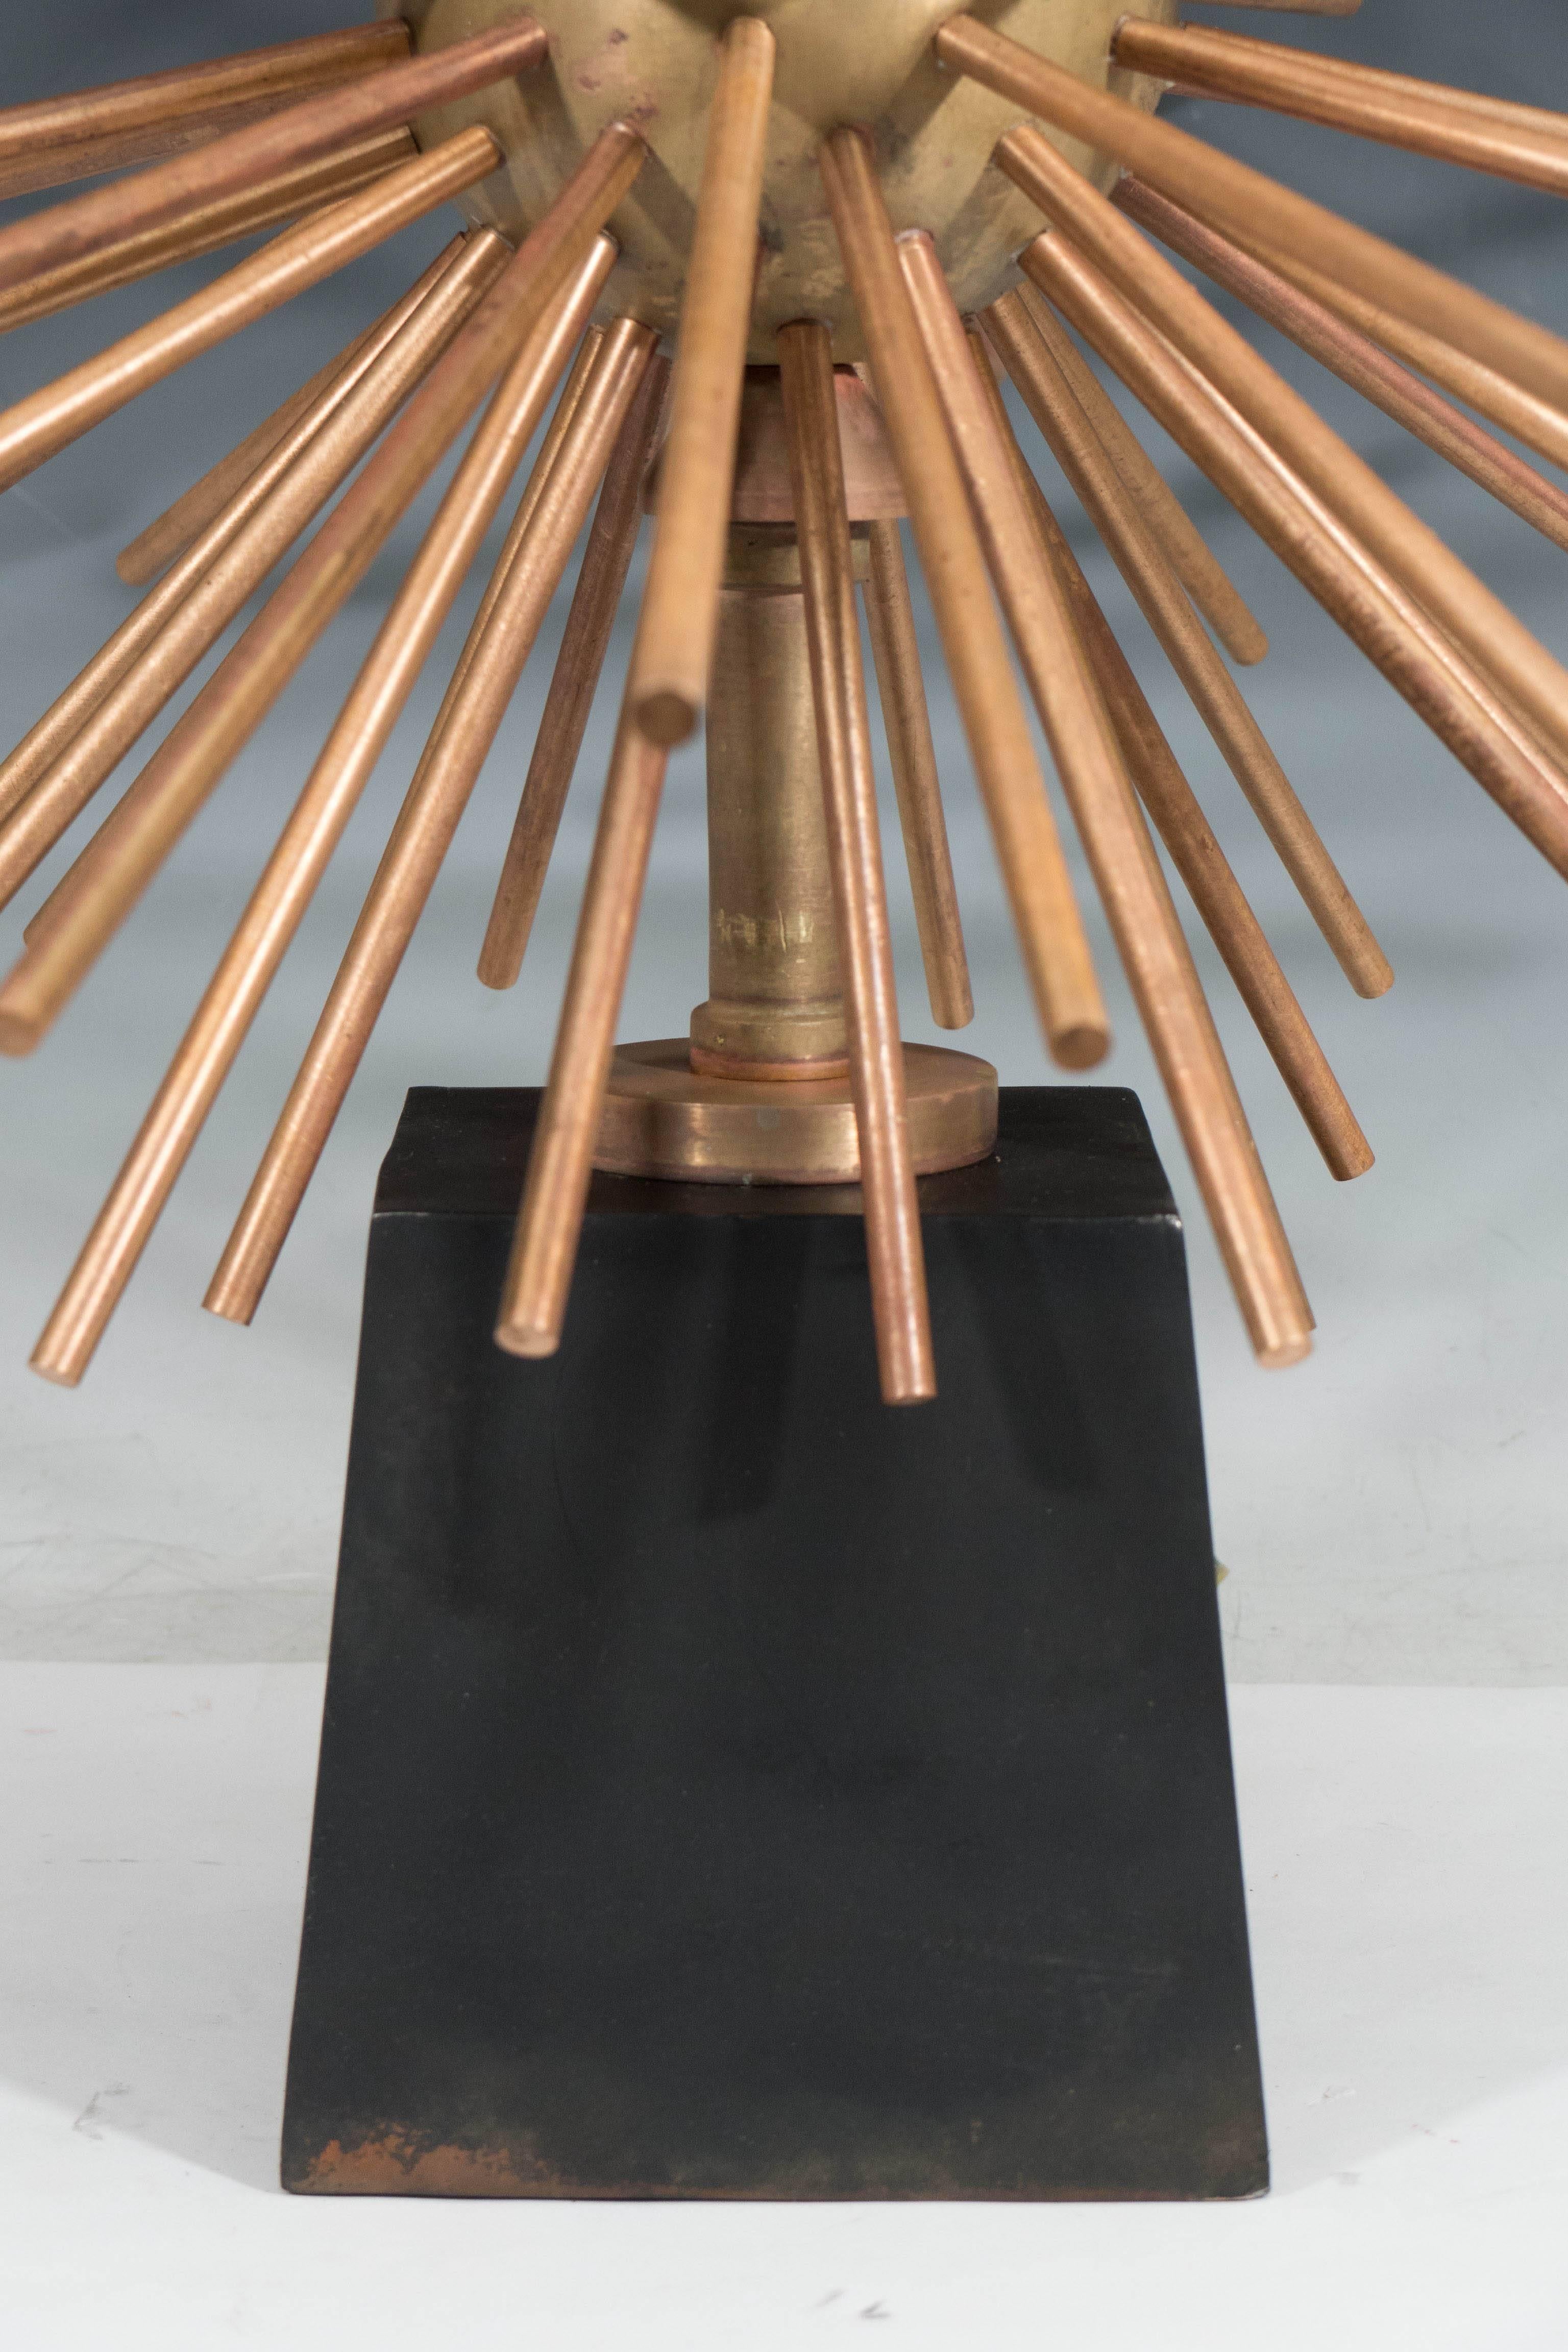 A pair of bronze Sputnik table lamps by designer Arturo Pani, produced in Mexico circa 1960s, each including double cluster sockets over bobbin styled stem and nucleus, surrounded by lengthy spires, on tapered square iron base in black. Despite